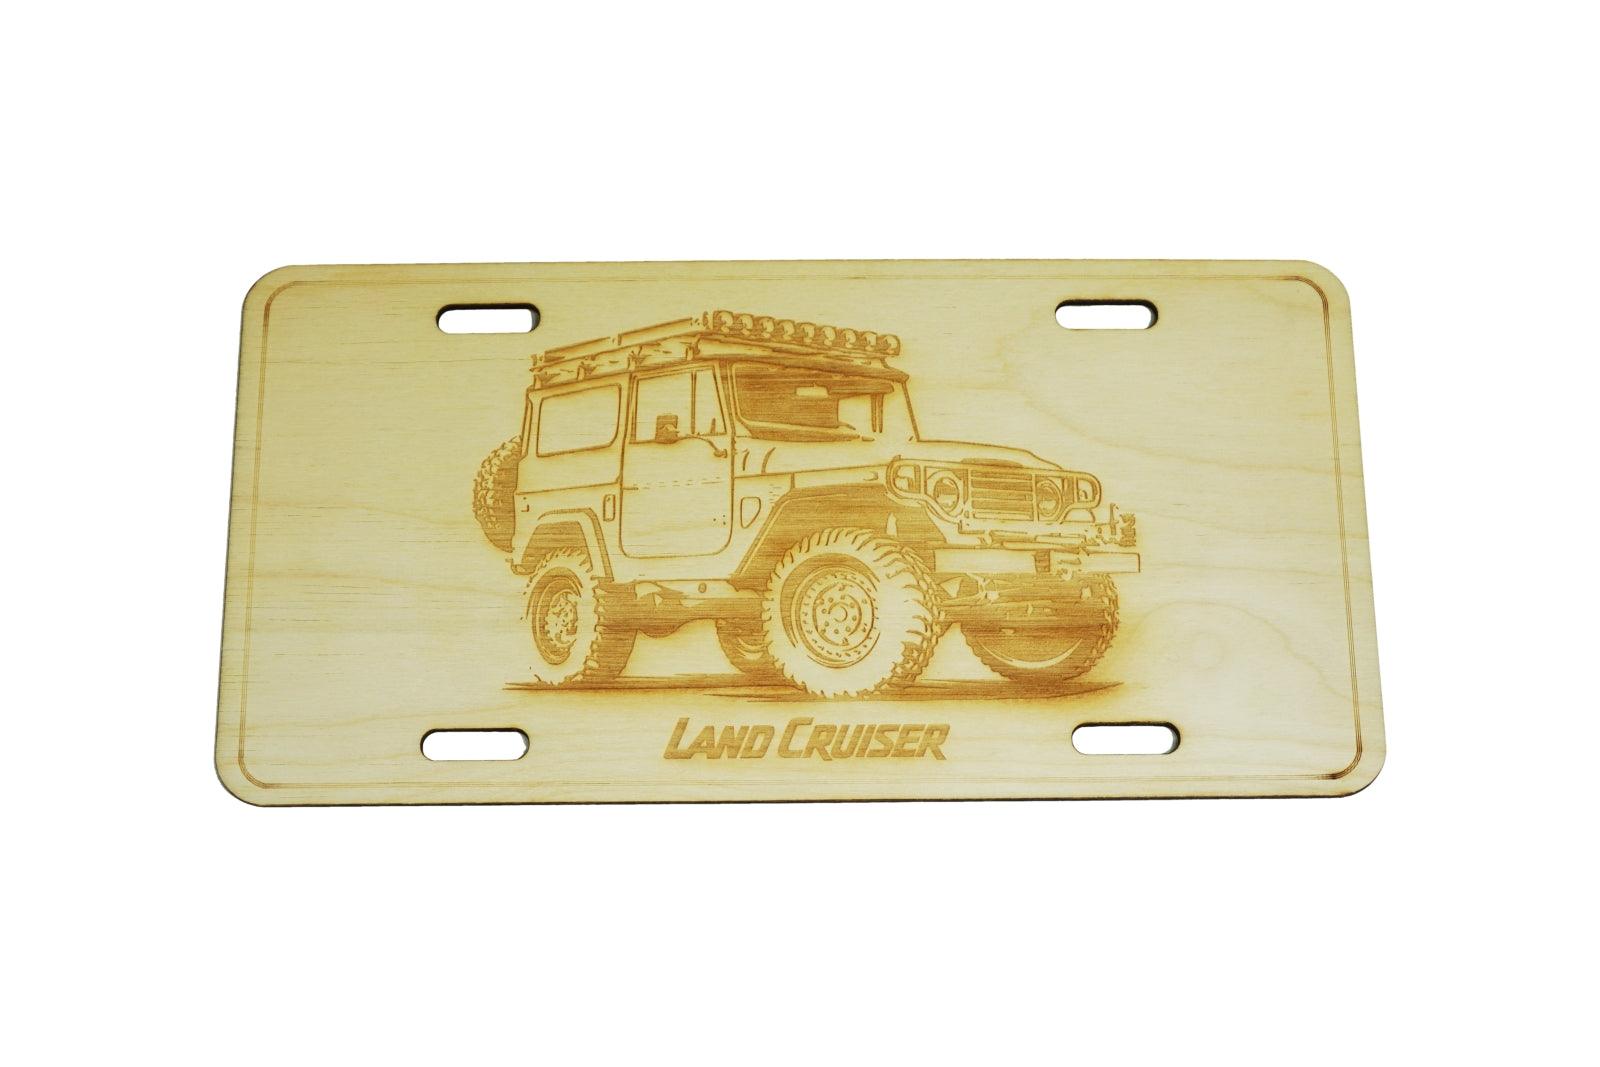 ZSPEC Early Toyota Landcruiser 4x4 SUV License Plate, Birch, Ornamental  1/8' Birch Plywood construction.  Approximately the same size as a traditional license plate ZSPEC Design LLC Toyota Landcruiser